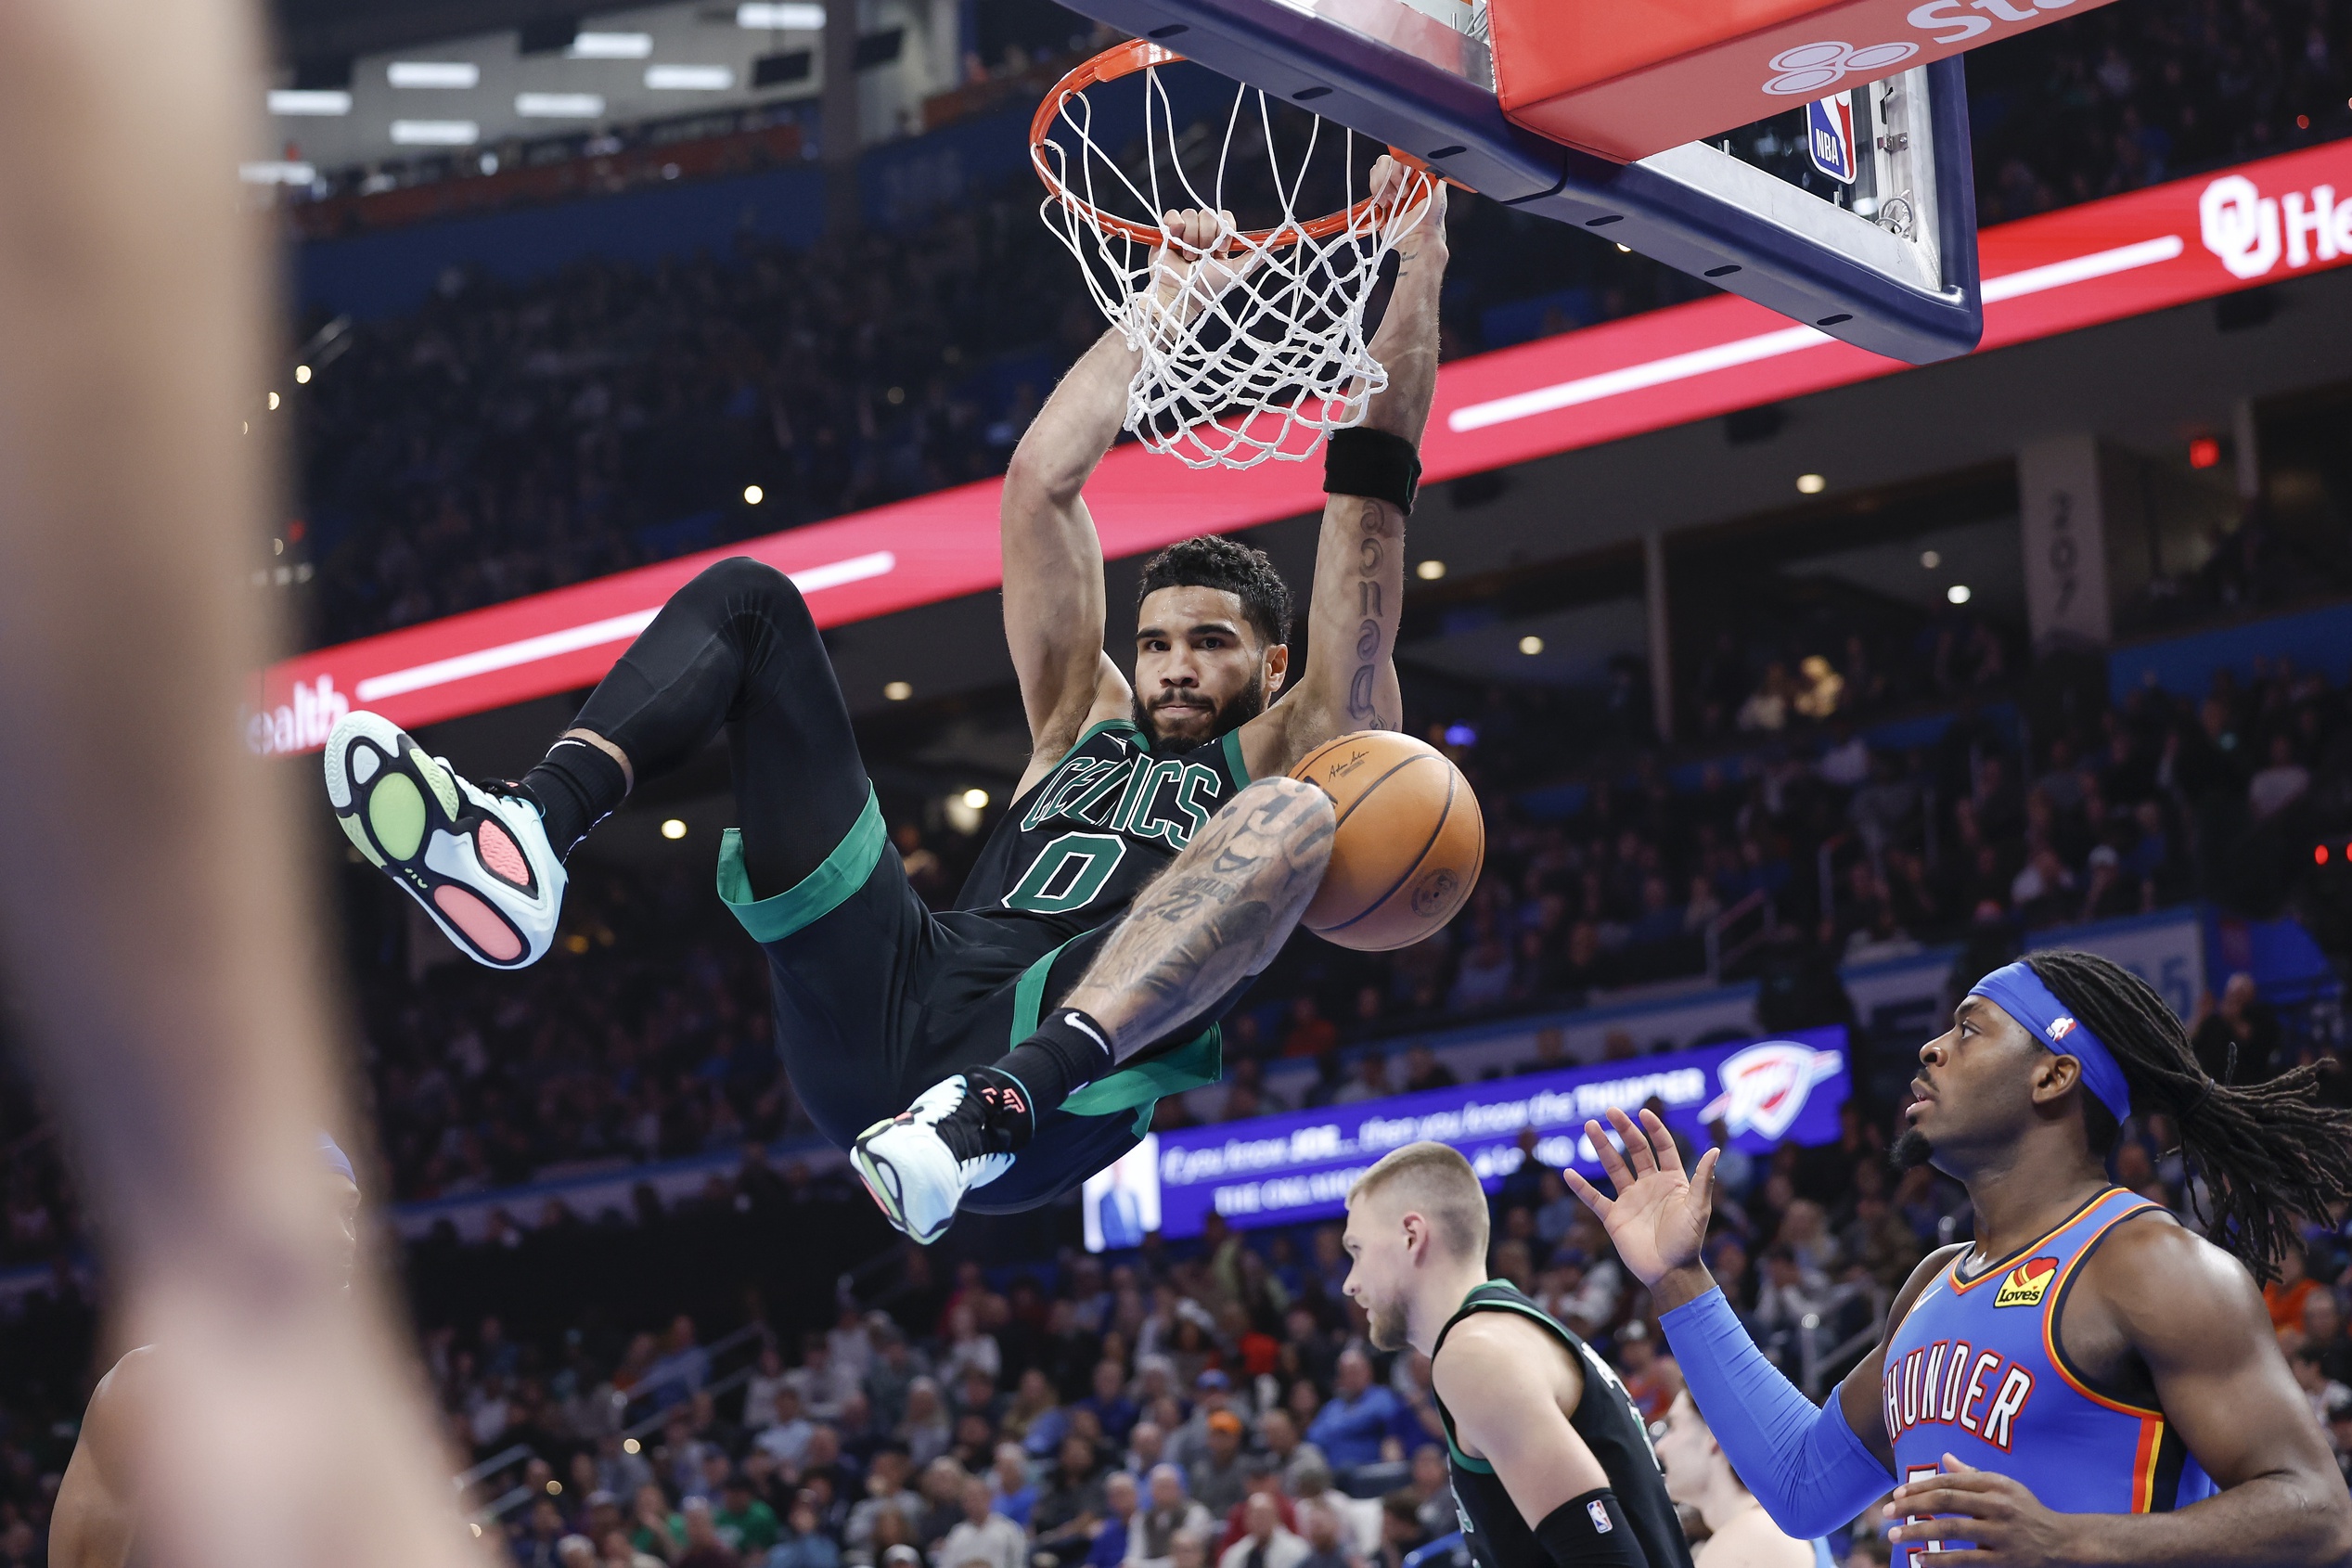 Boston Celtics forward Jayson Tatum (0) hangs on the rim after dunking against the Oklahoma City Thunder during the second half at Paycom Center.